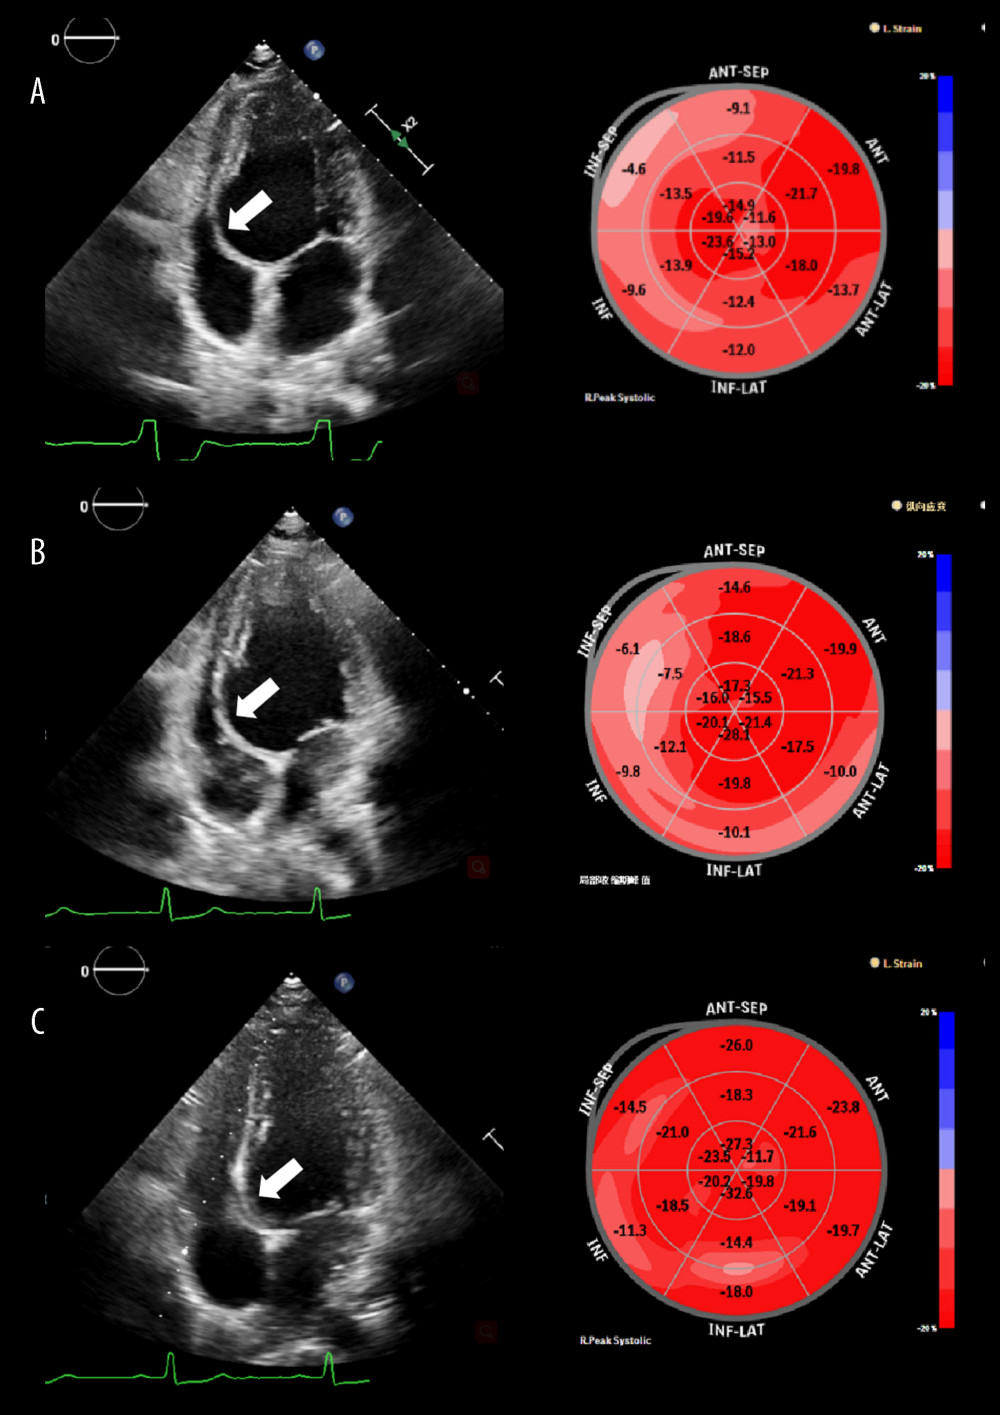 Comparison of echocardiogram. (A) Preoperative echocardiogram showed left ventricle dilation, basal segment of ventricular septum thinning, and regional wall swung toward the right ventricle in the systolic period (marked by arrow). Left ventricular longitudinal strain images displayed dyssynchronous left ventricle motion (left ventricle global longitudinal strain [LVGLS], 14.7%). Septal segments of the left ventricle had most abnormal strain values. (B) There was a recovery trend of paradoxical movement in ventricular septum after catheter ablation (marked by arrow). Left ventricular systolic function improved slightly (LVGLS, 15.8%). (C) The structure and synchrony of ventricular septum improved significantly 6 months after catheter ablation (marked by arrow; LVGLS, 19.7%).